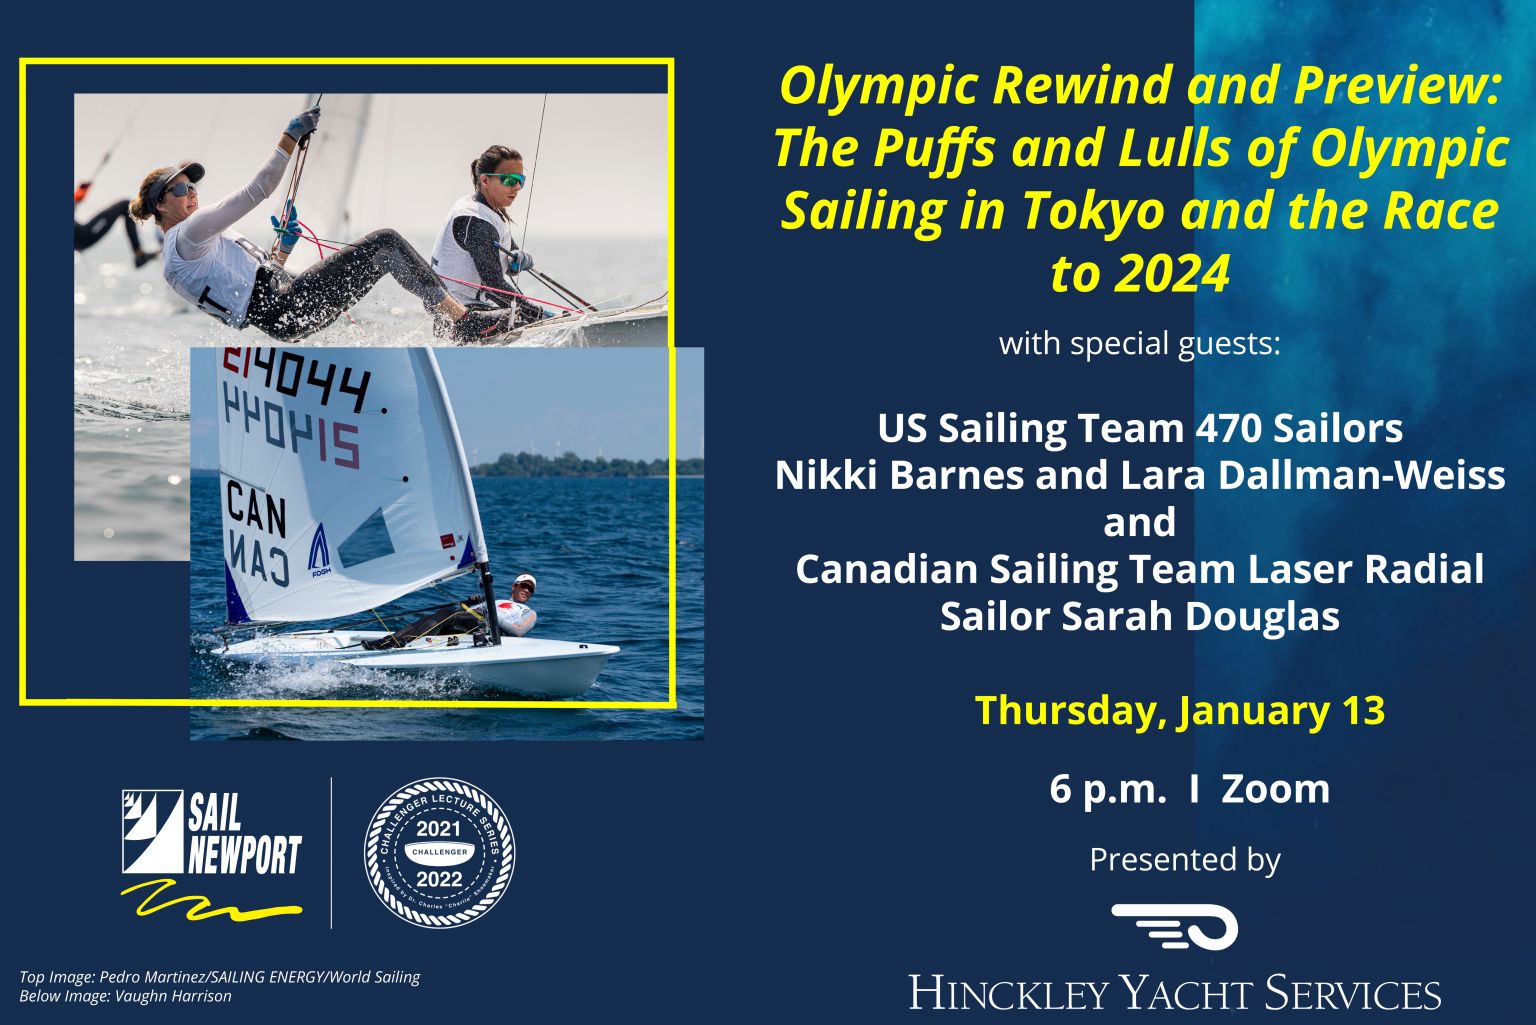 Challenger Lecture Series: Olympic Rewind and Preview: The Puffs and Lulls of Olympic Sailing in Tokyo and the Race to 2024